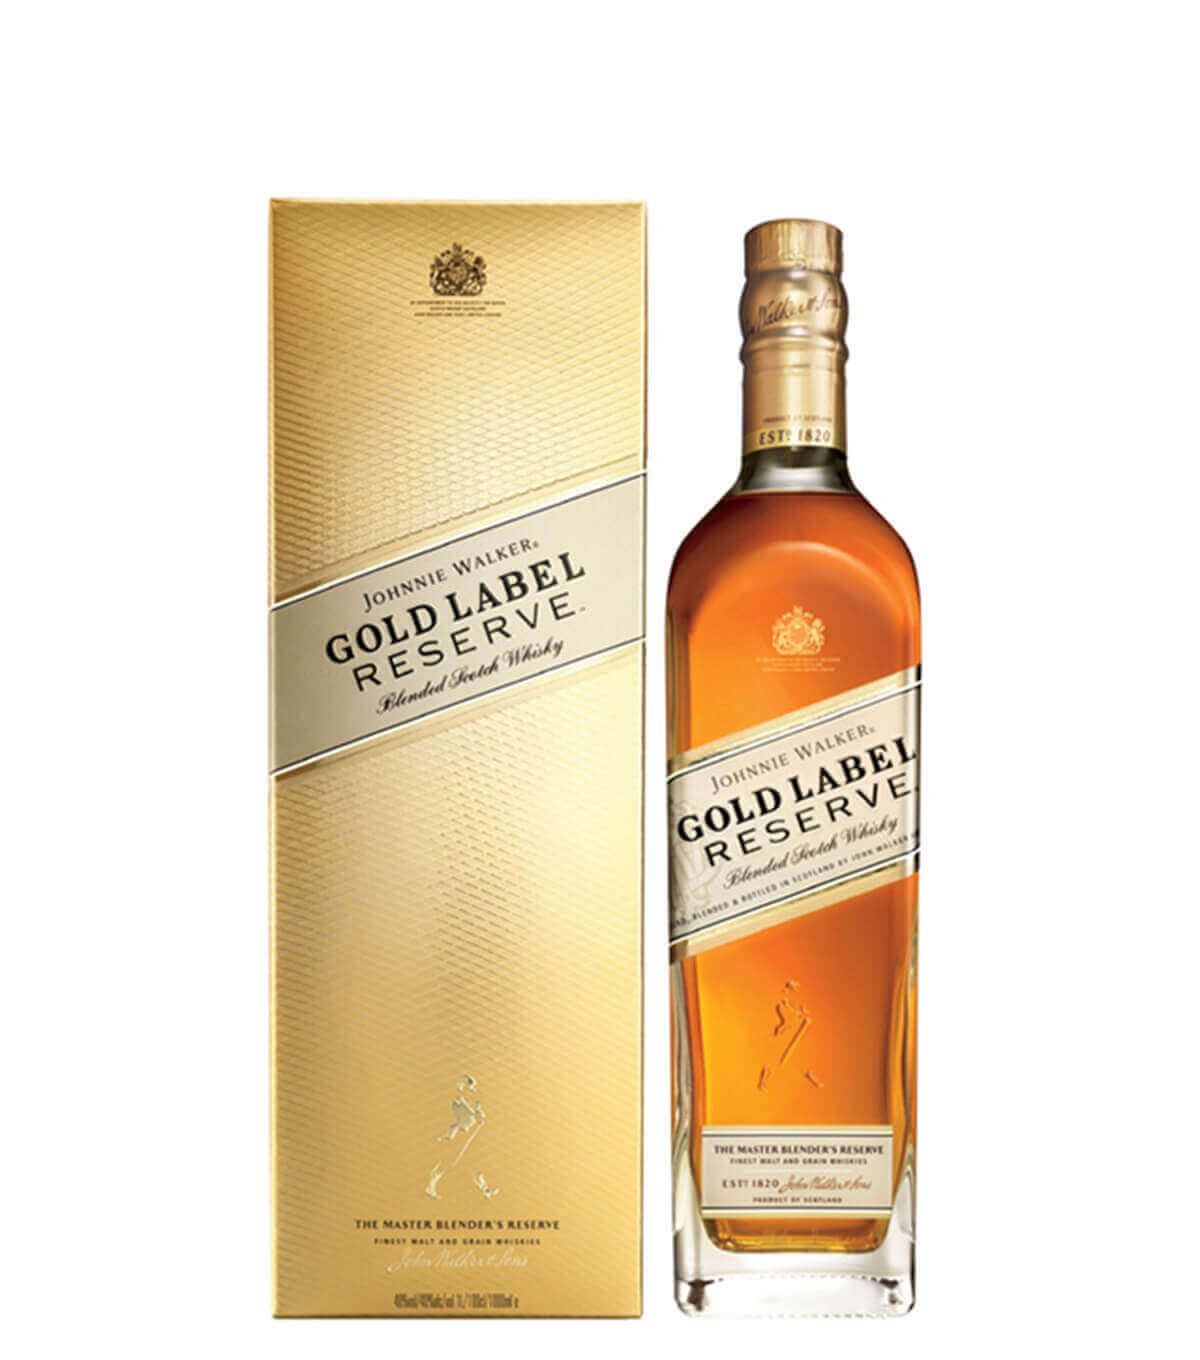 34 Gold Label India Price Labels Database 2020 The indian consumers purchase gold for special occasions, such as weddings generally, purchasing gold is mainly all over india for the diwali festival (around october to november). 34 gold label india price labels